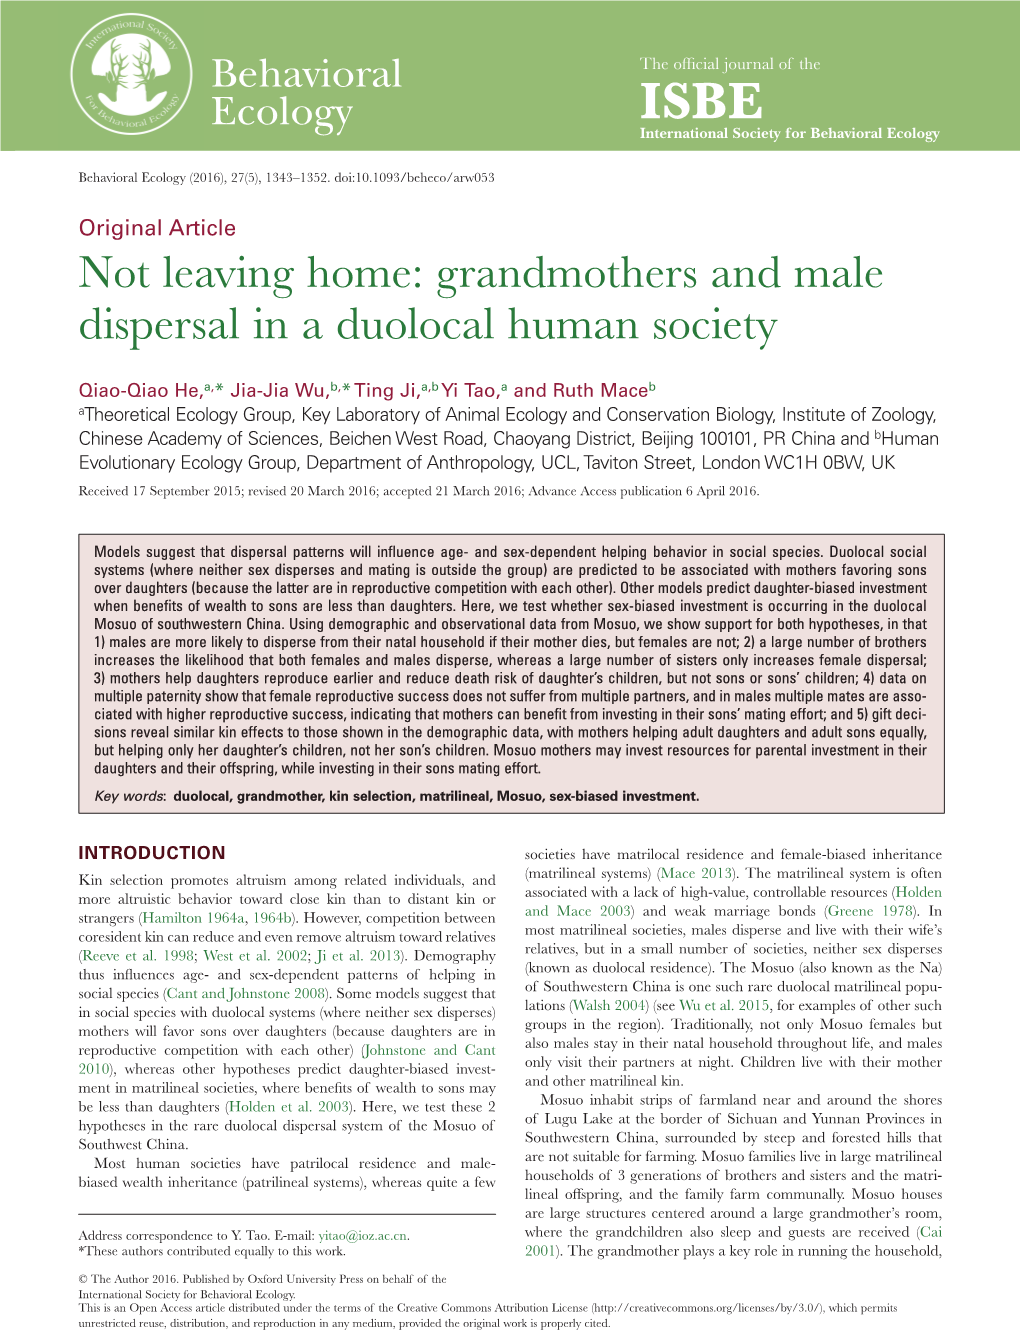 Grandmothers and Male Dispersal in a Duolocal Human Society